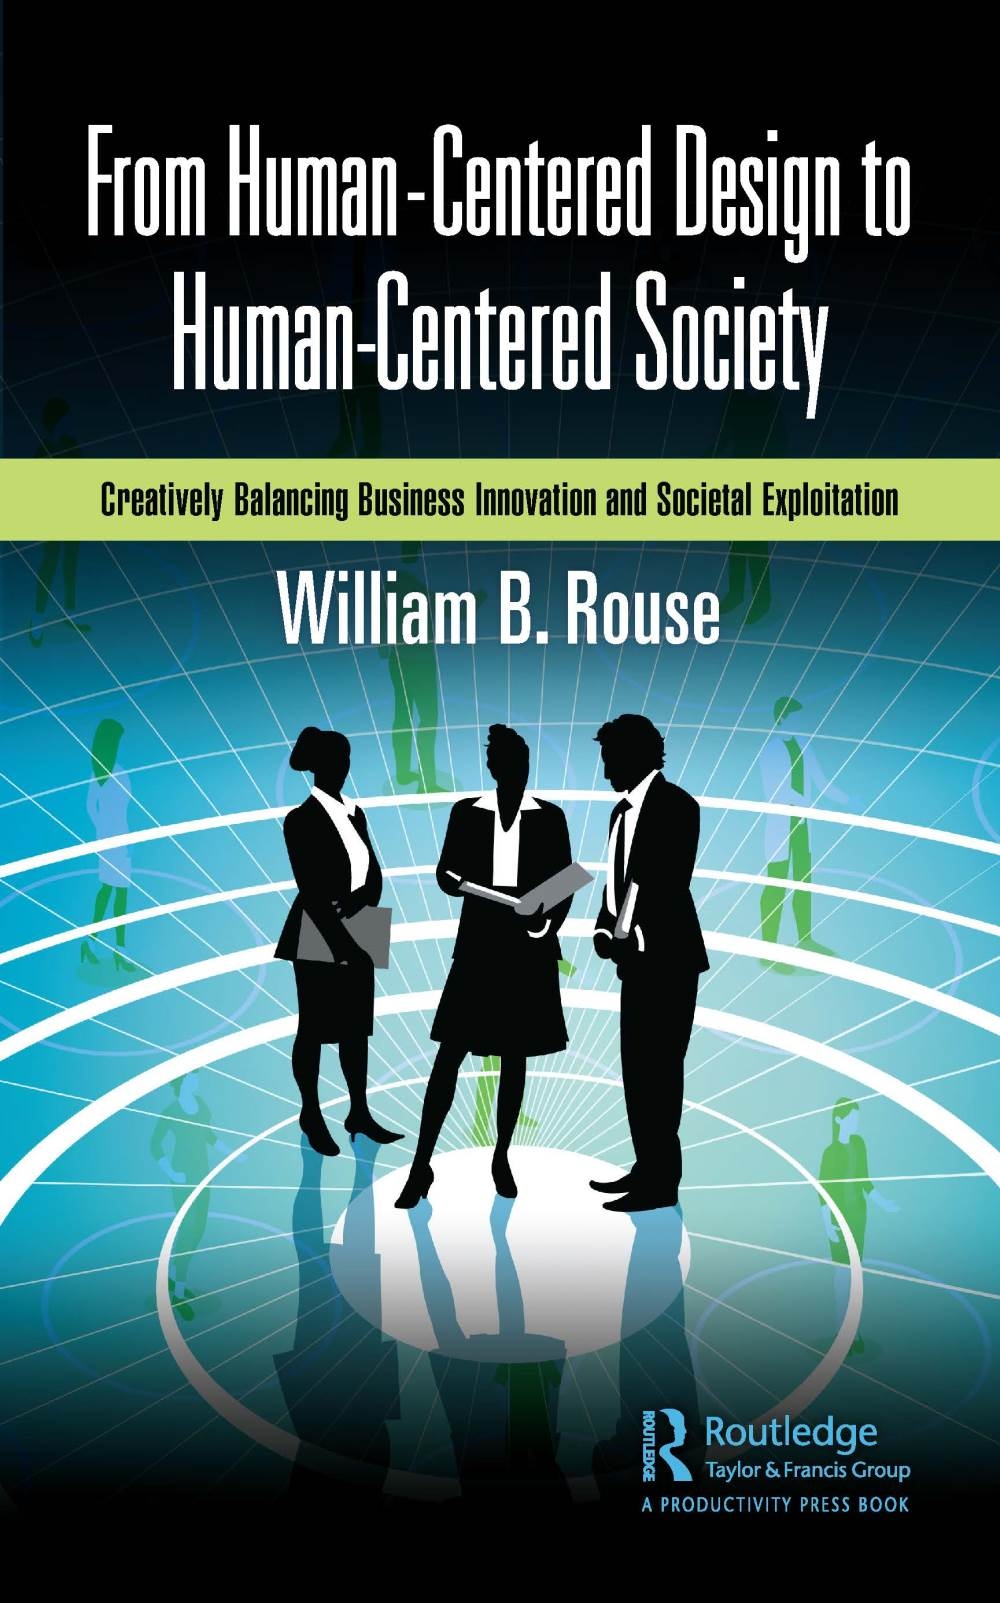 From Human-Centered Design to Human-Centered Society: Creatively Balancing Business Innovation and Exploitation